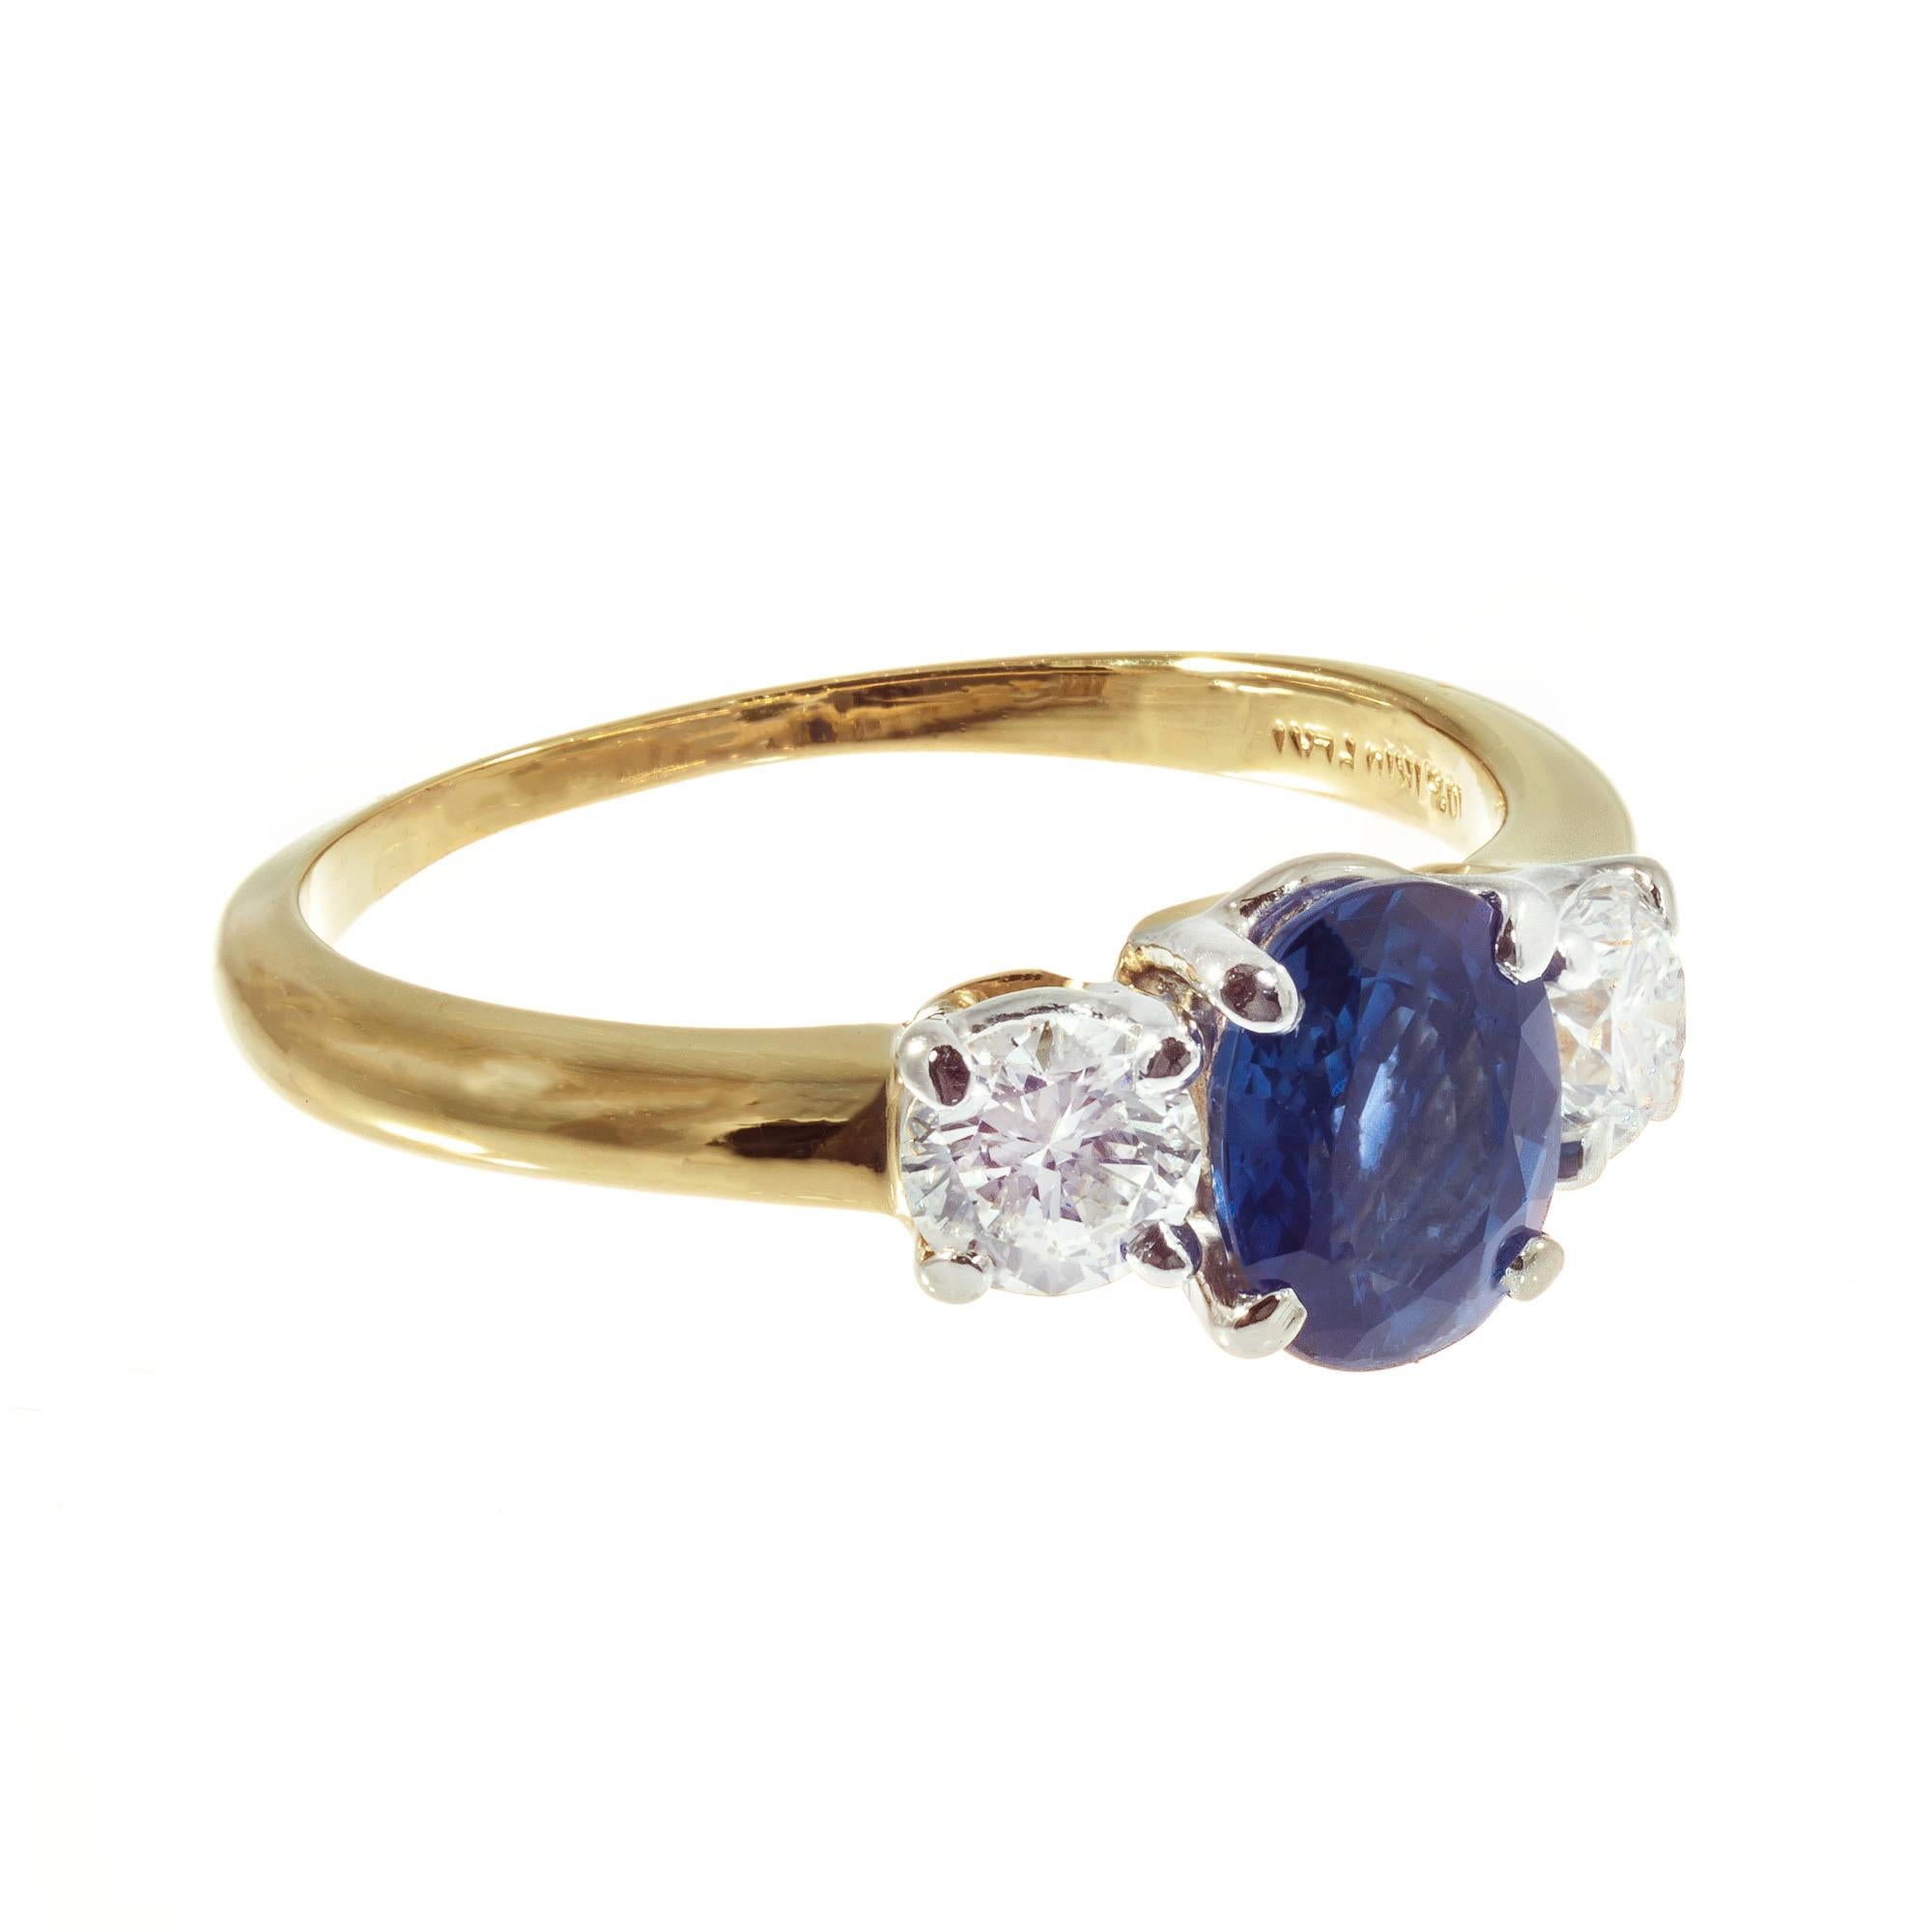 Oval Cut   GIA Certified 1.25 Carat Sapphire Diamond Platinum Gold Engagement Ring